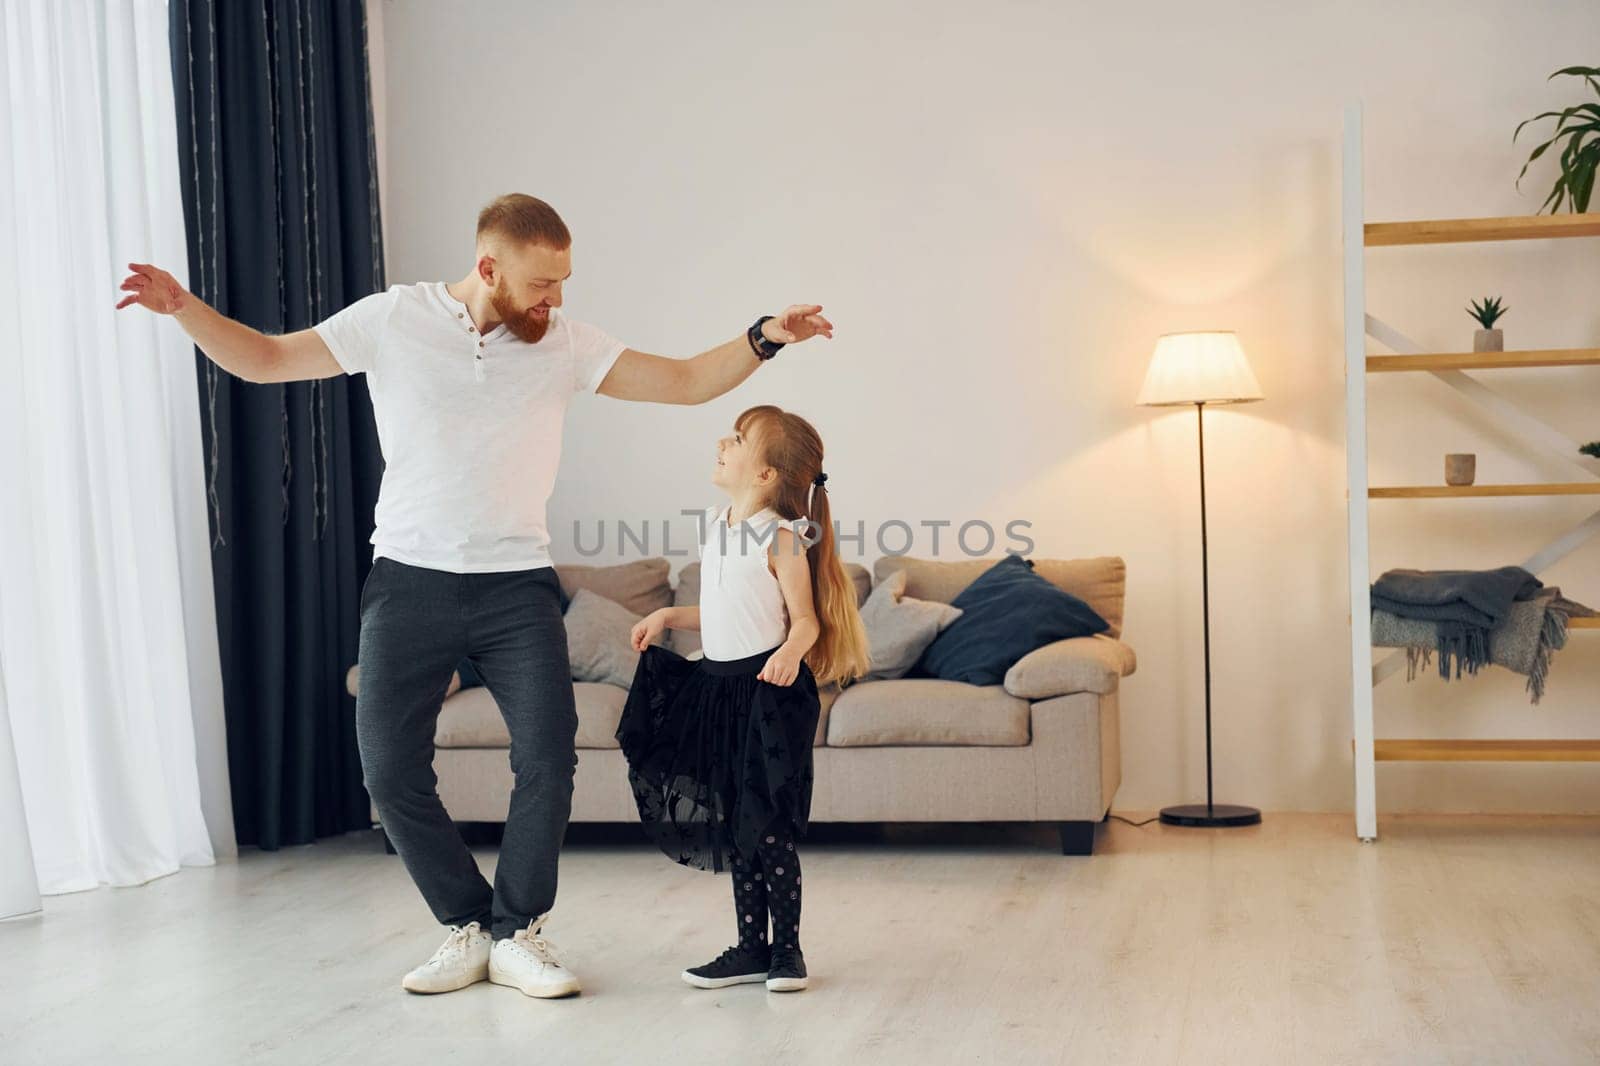 Yoga poses. Father with his little daughter is at home together.